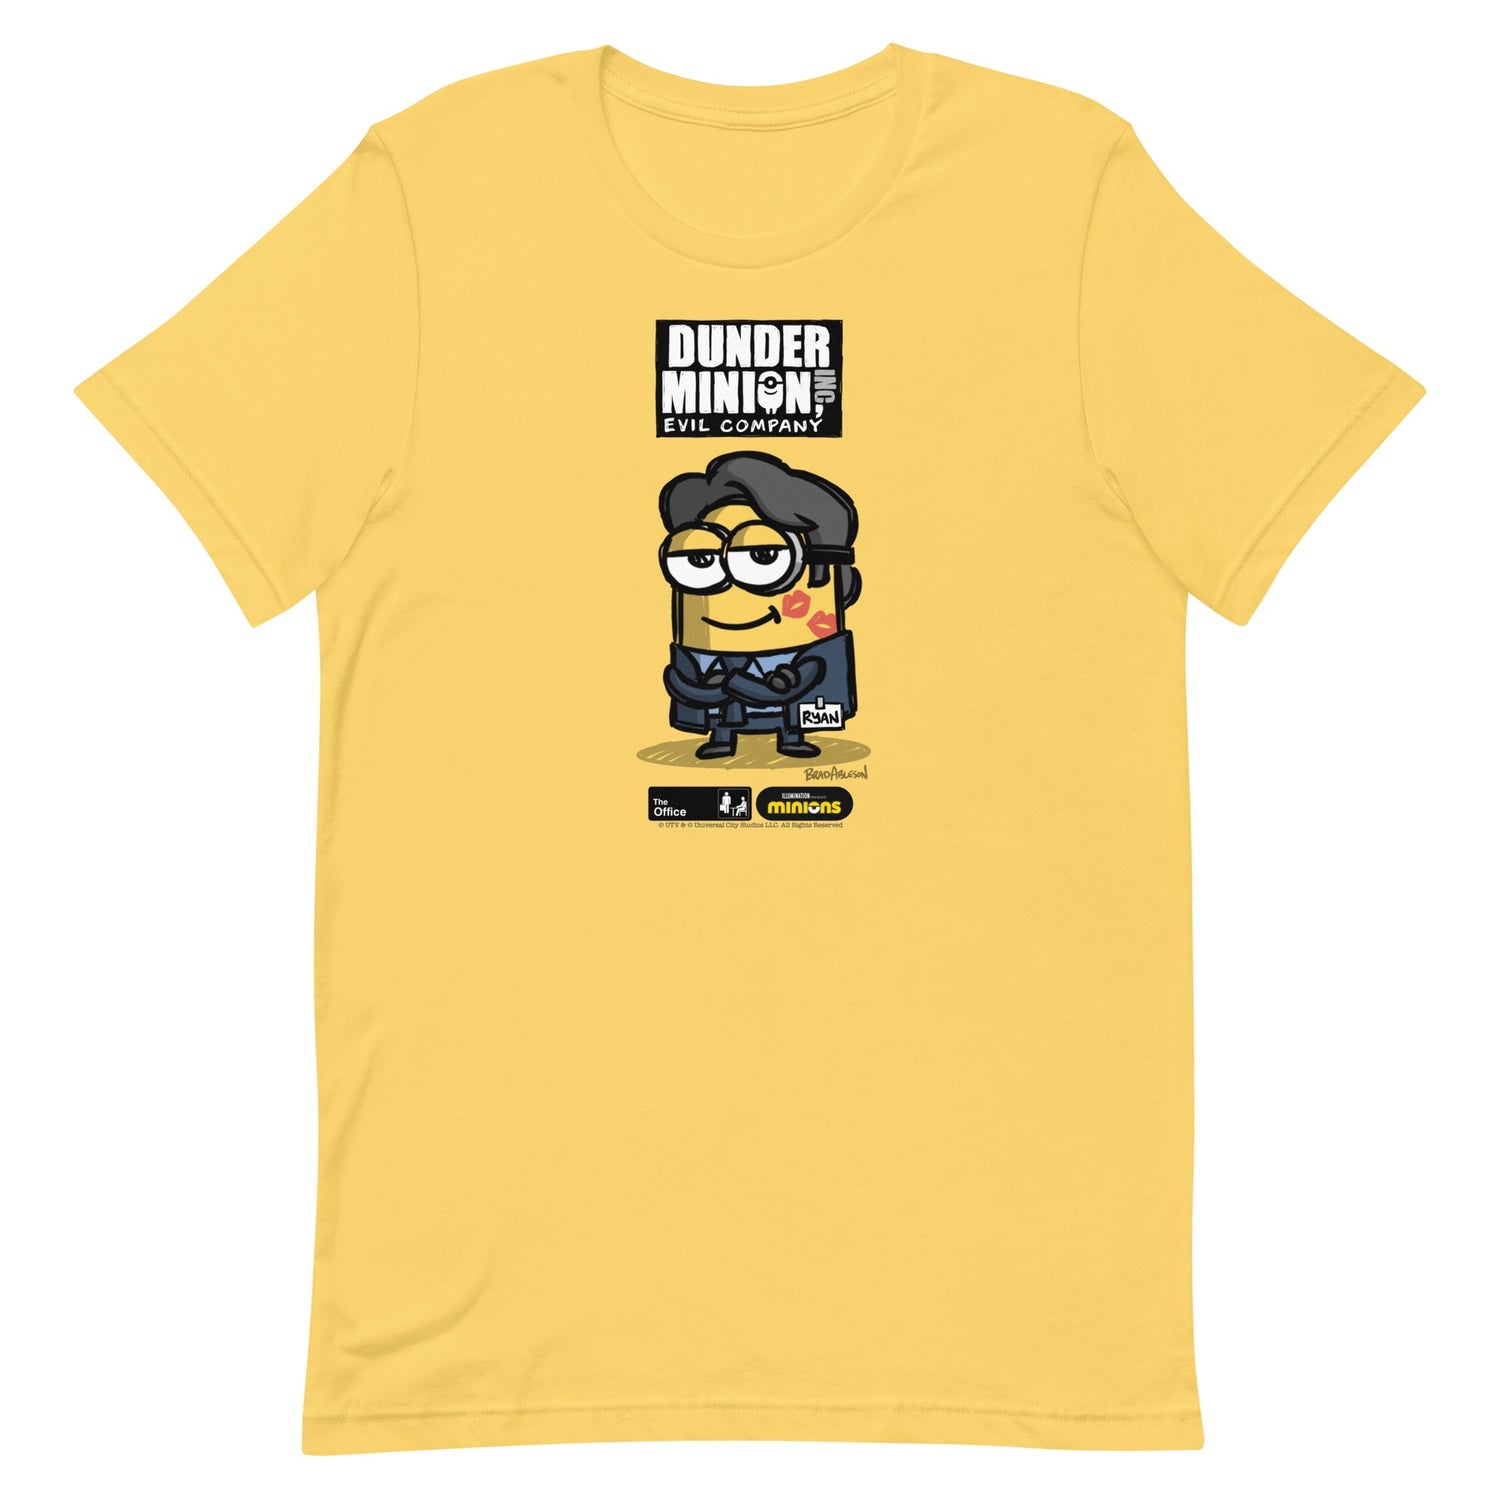 Minions Store NBC Office – The T-Shirt Character X